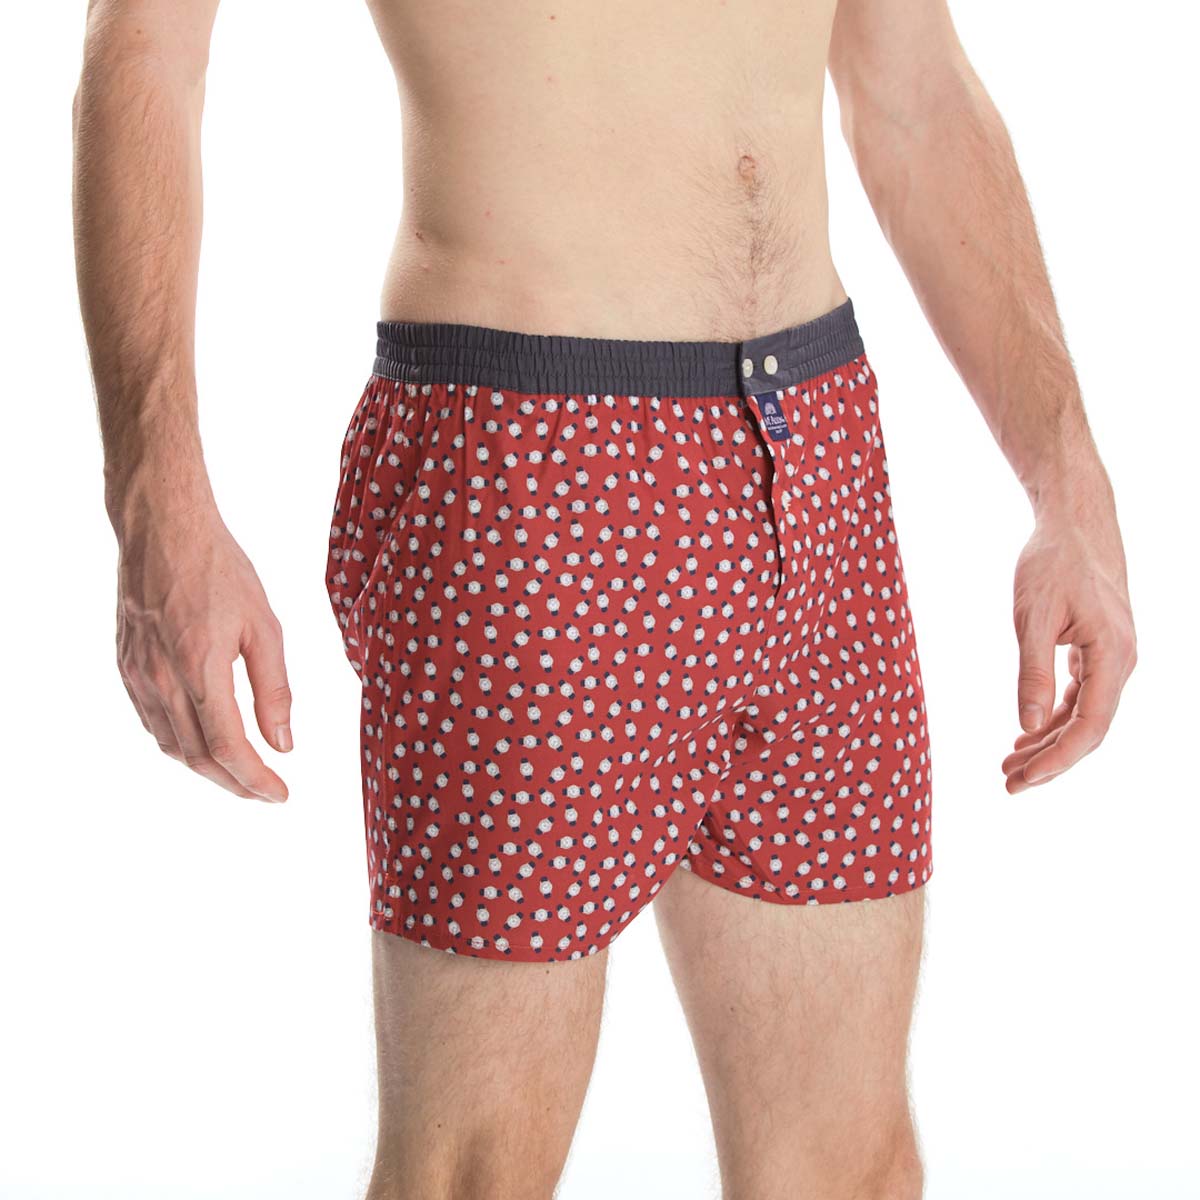 M4053 Boxershorts - Watches Red